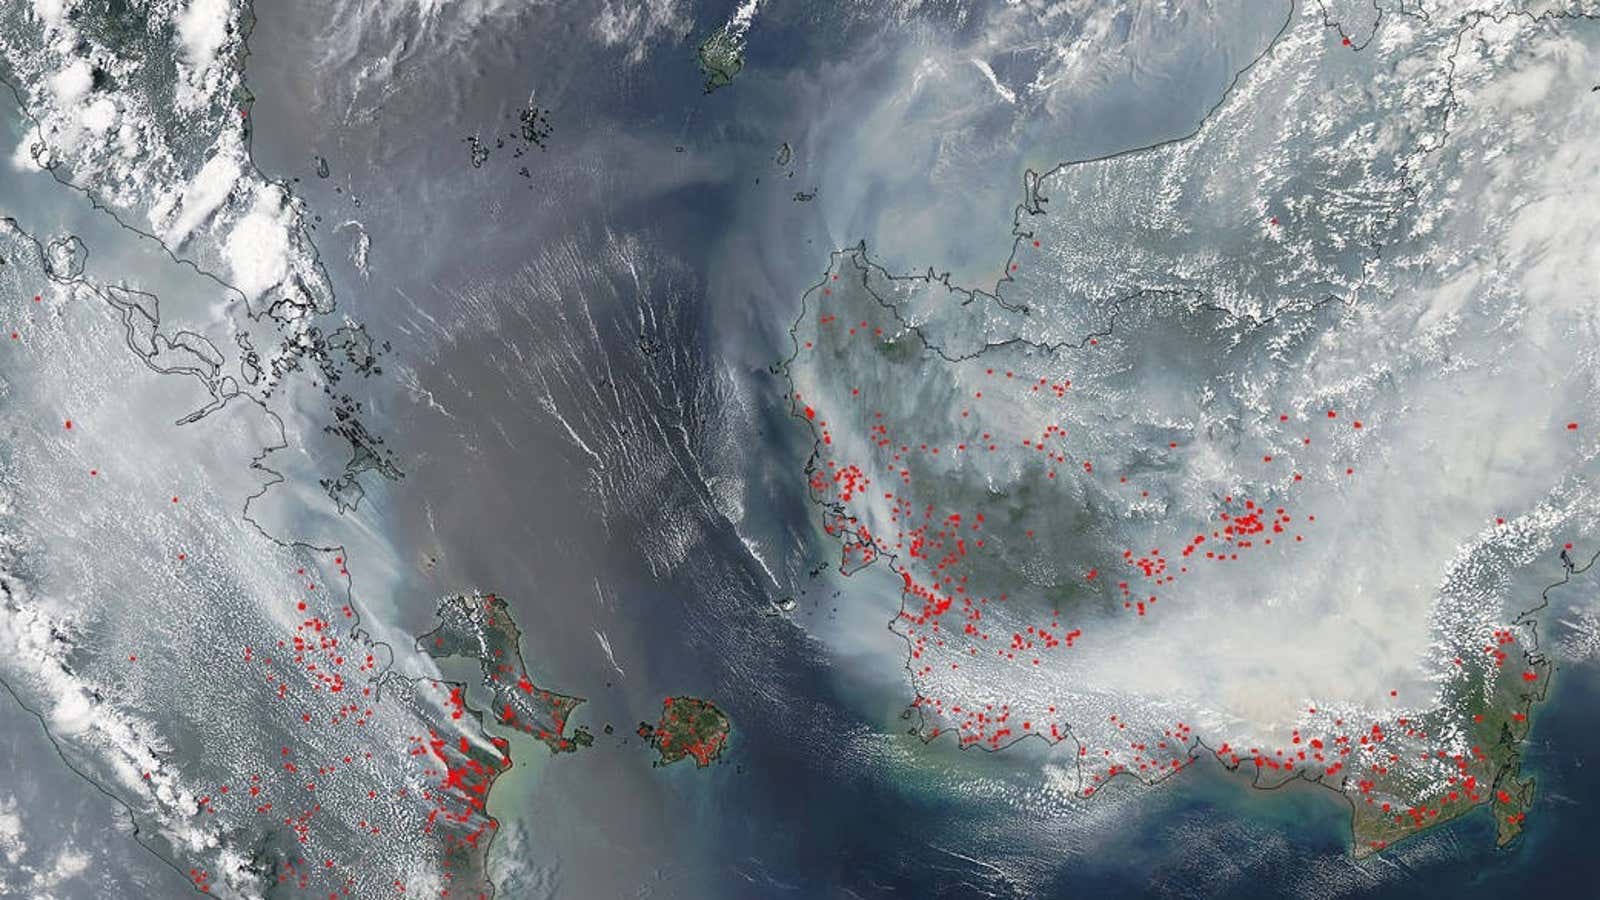 That’s Borneo on the right, under all that smoke. Sumatra is on the left.